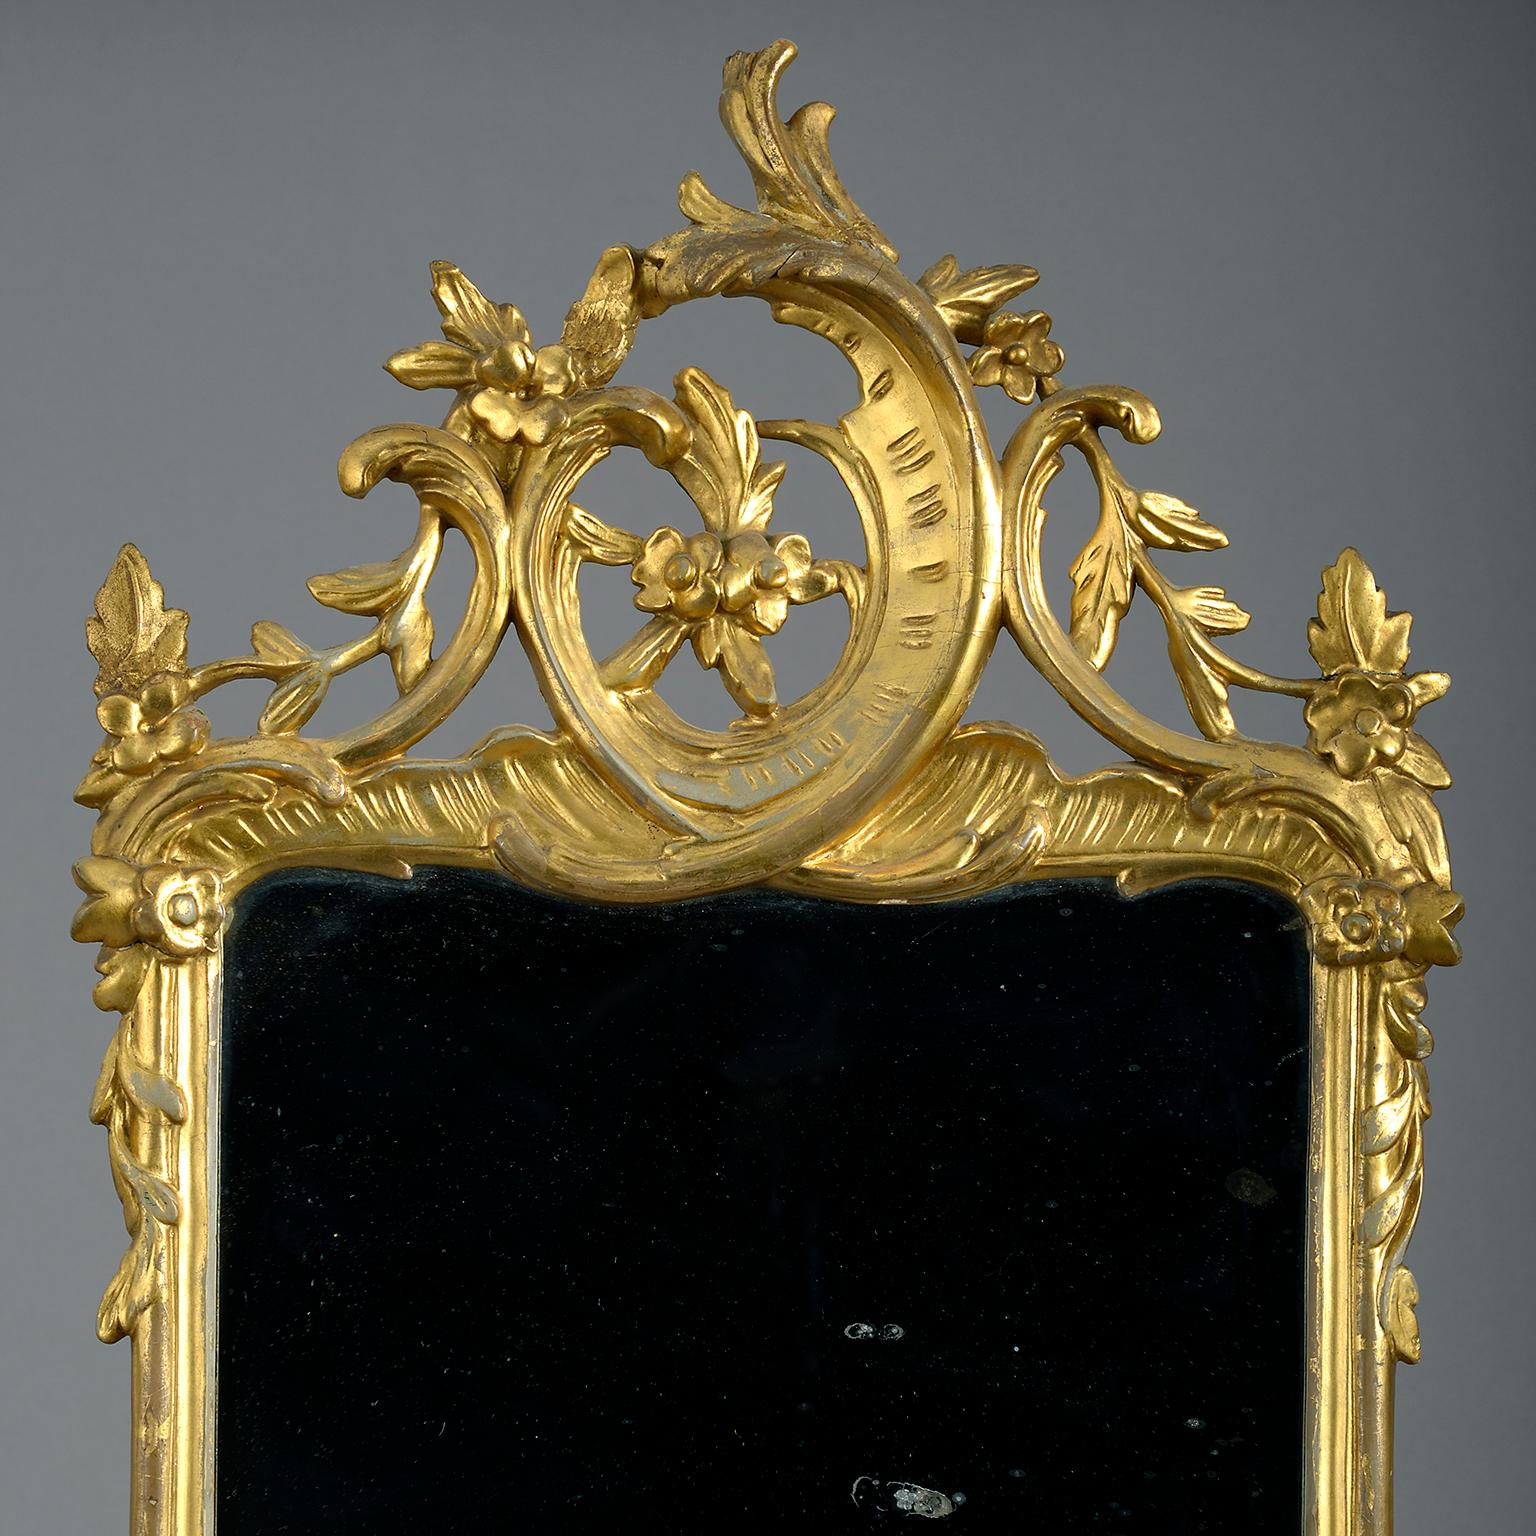 Mid-18th century giltwood mirror, the rectangular mercury-silvered plate contained within a frame of bold rococo scrolls and foliate swags in the manner of Johann Michael Hoppenhaupt.

The richly carved frame of rocailles and C-scrolls and sinuous